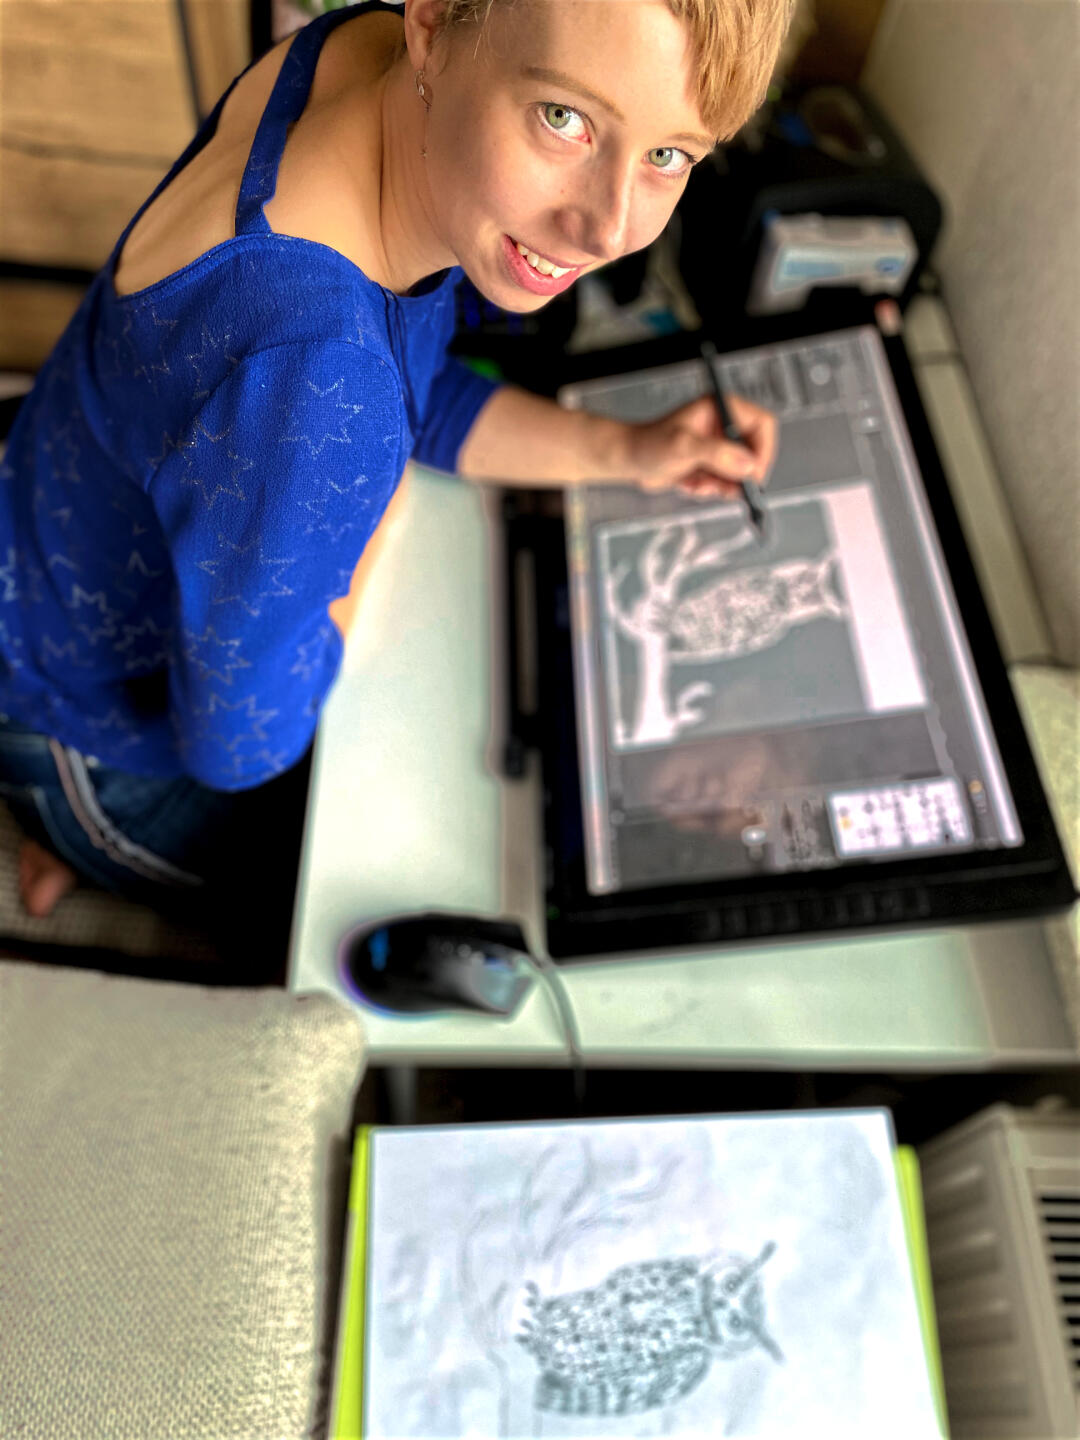 On this image, observe Susi, co-owner of Pantercats, transferring a sketch to the computer with the aid of a graphics monitor. This marks the beginning of our jewelry creation process, resulting in remarkable 925 silver pieces, including necklaces, earrings, chains, bracelets, and more, once the 3D design is complete.